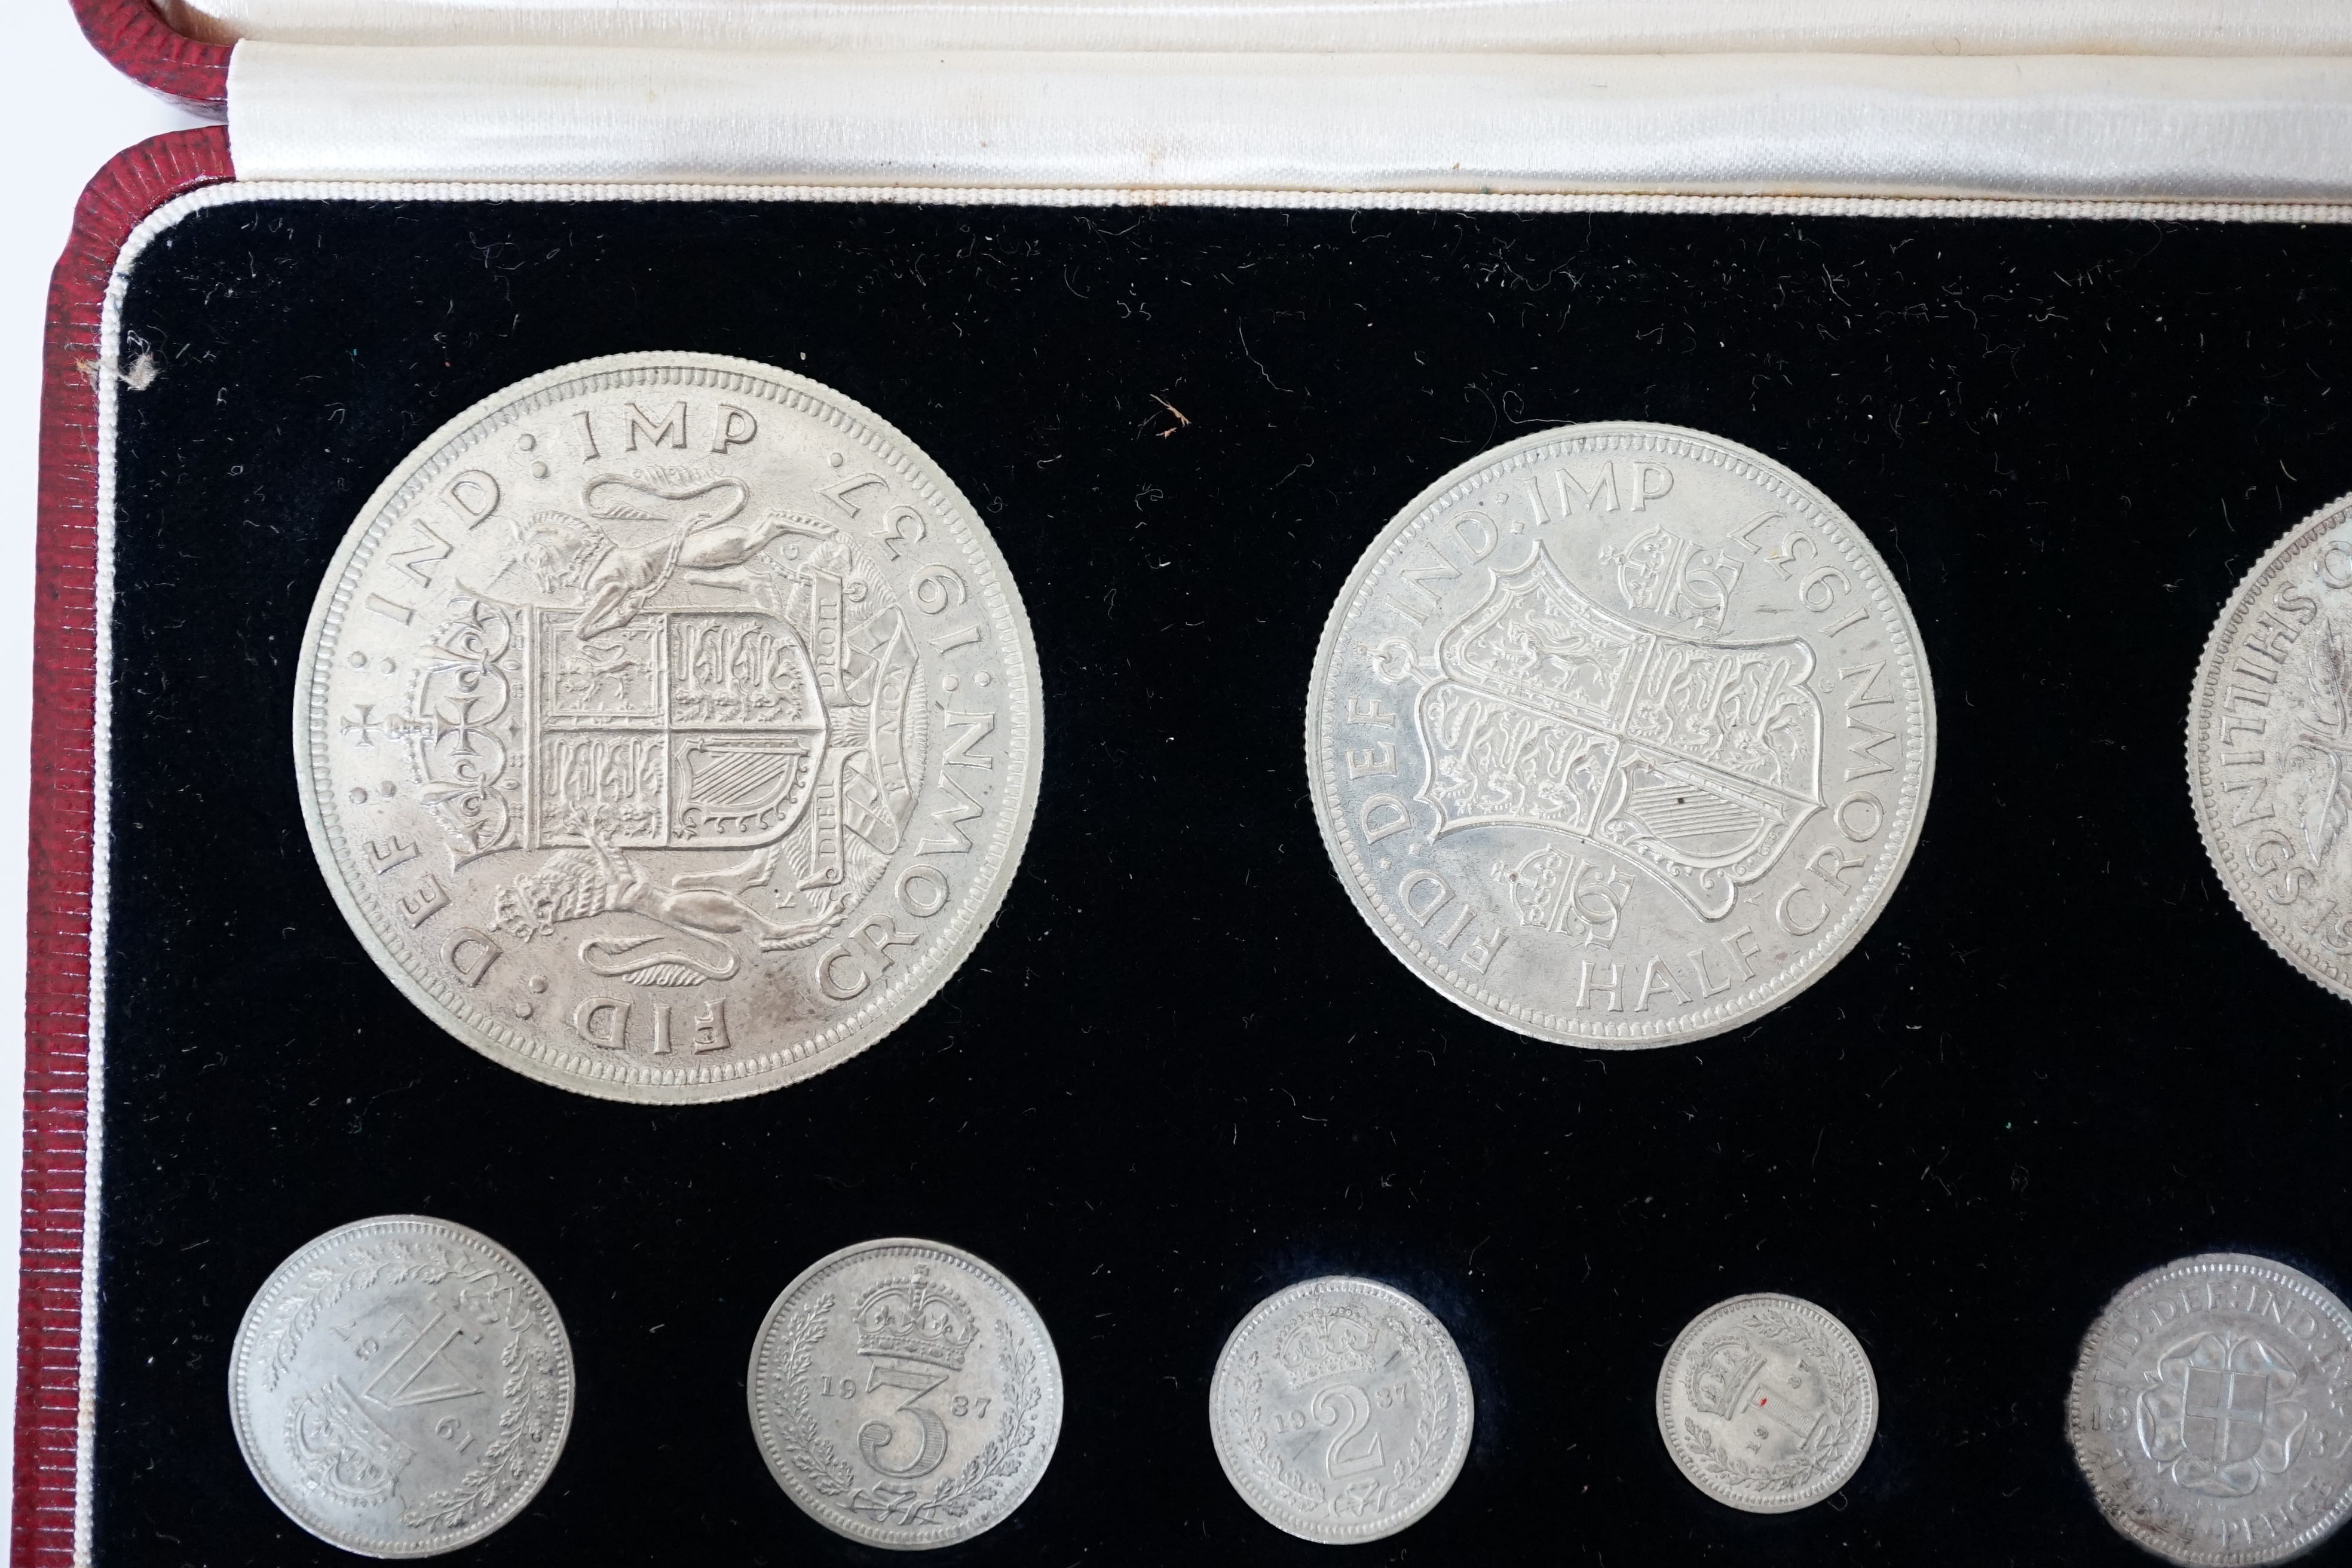 British coins, George VI coronation 1937 specimen fifteen coin set, comprising silver crown to threepence, brass threepence to bronze farthing and silver maundy 1d - 4d, UNC, in case of issue